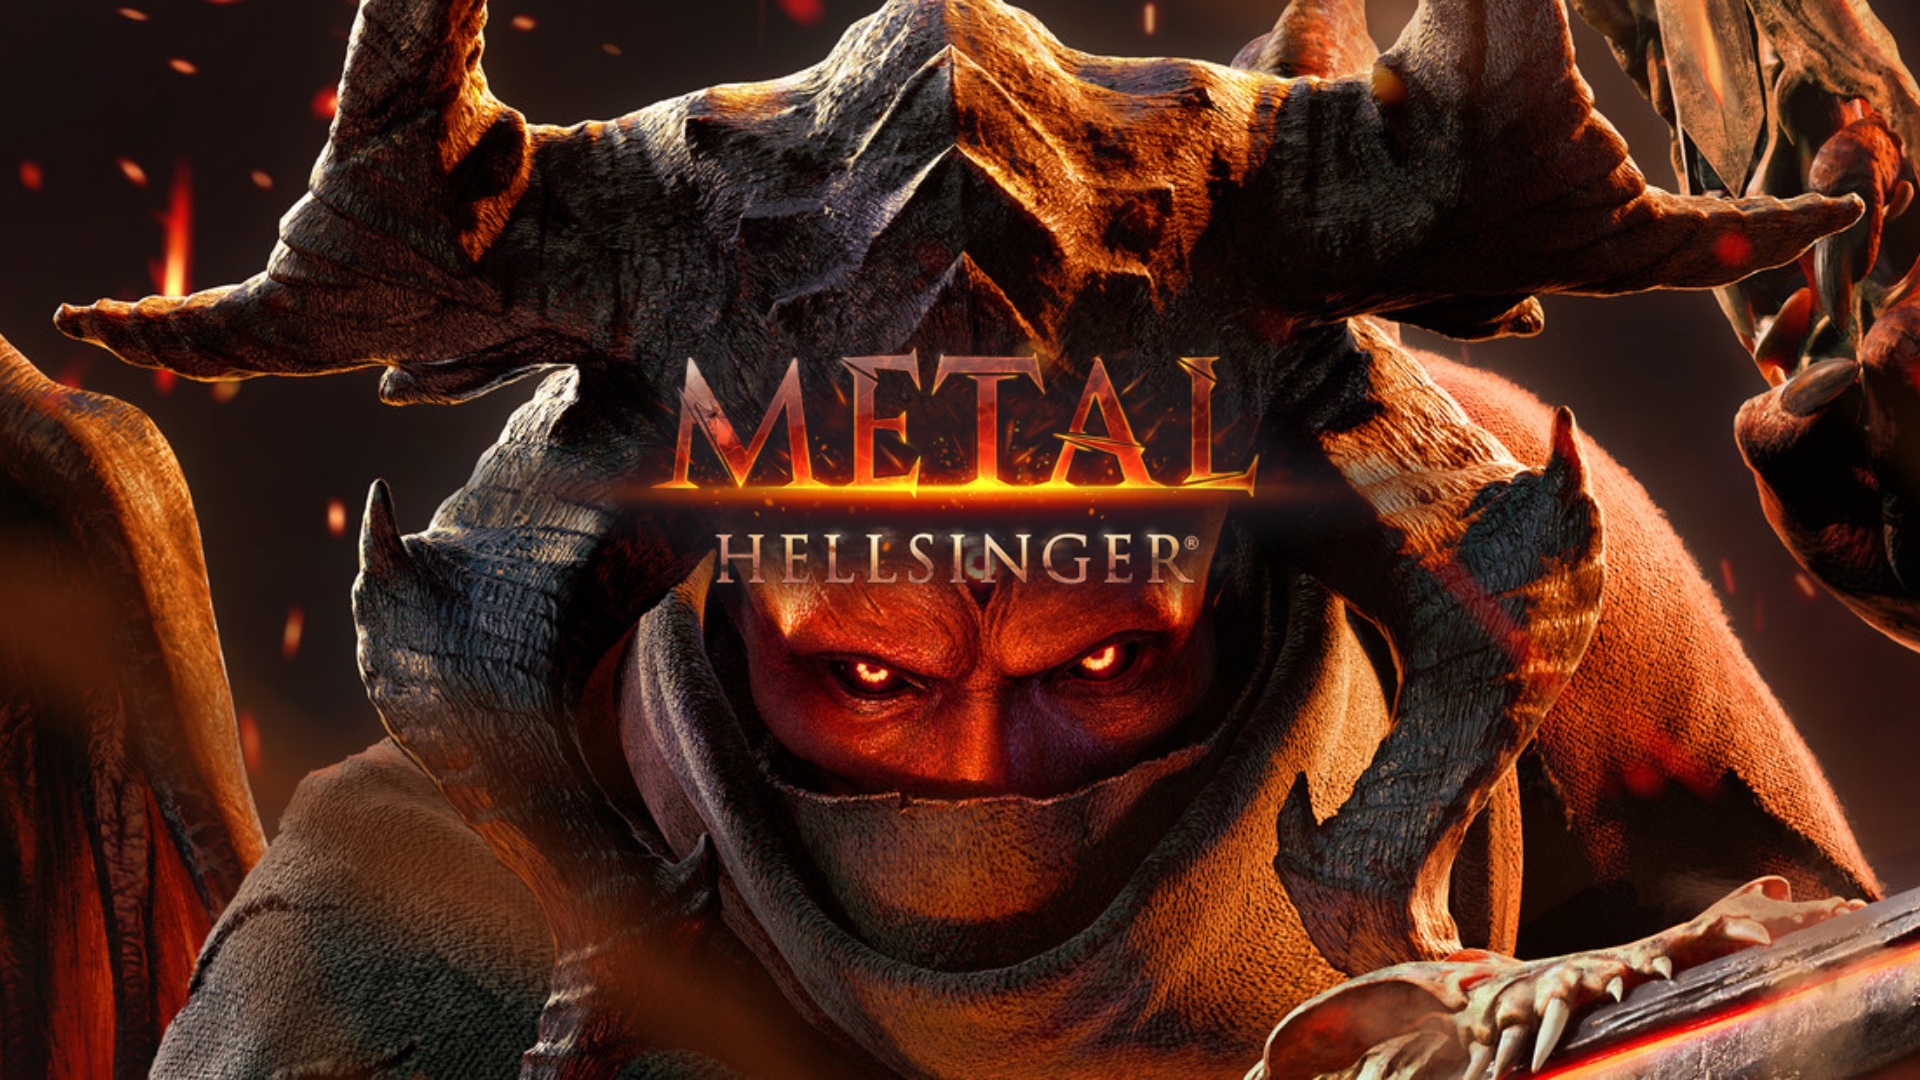 THIS GAME GETS SOUNDTRACK OF THE YEAR, Metal: Hellsinger